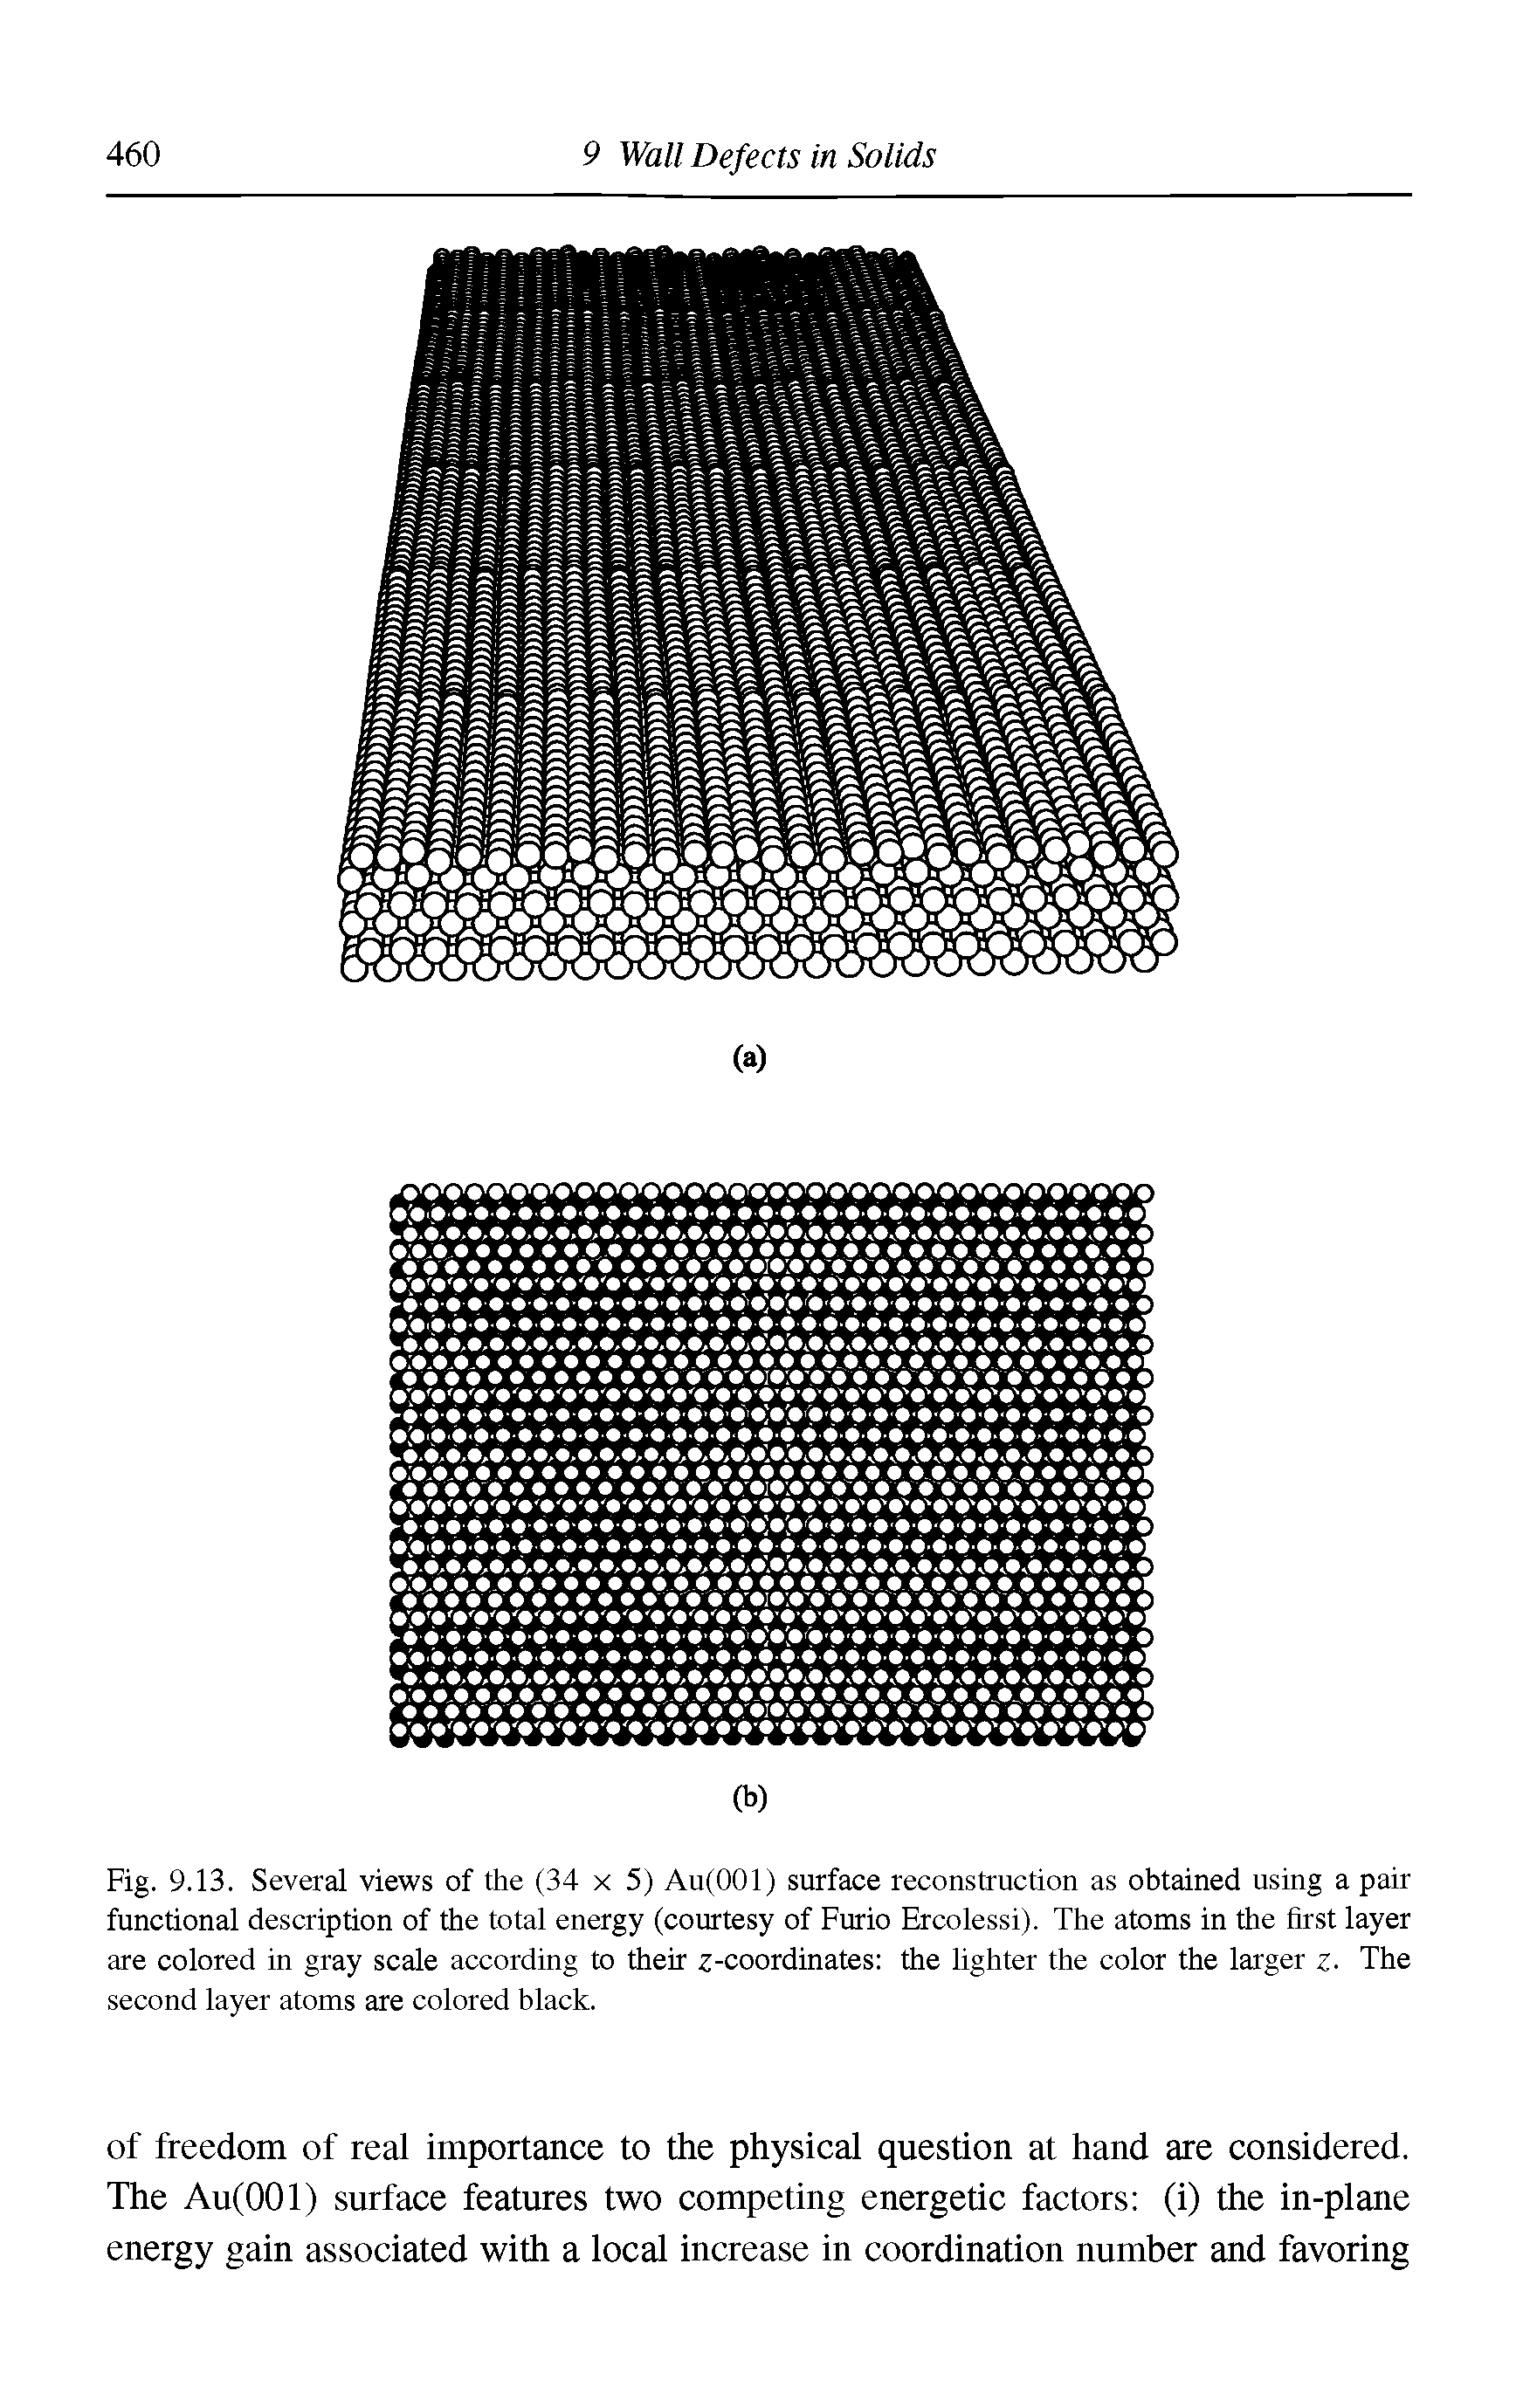 Fig. 9.13. Several views of the (34 x 5) Au(OOl) surface reconstruction as obtained using a pair functional description of the total energy (courtesy of Furio Ercolessi). The atoms in the first layer are colored in gray scale according to their z-coordinates the lighter the color the larger z- The second layer atoms are colored black.